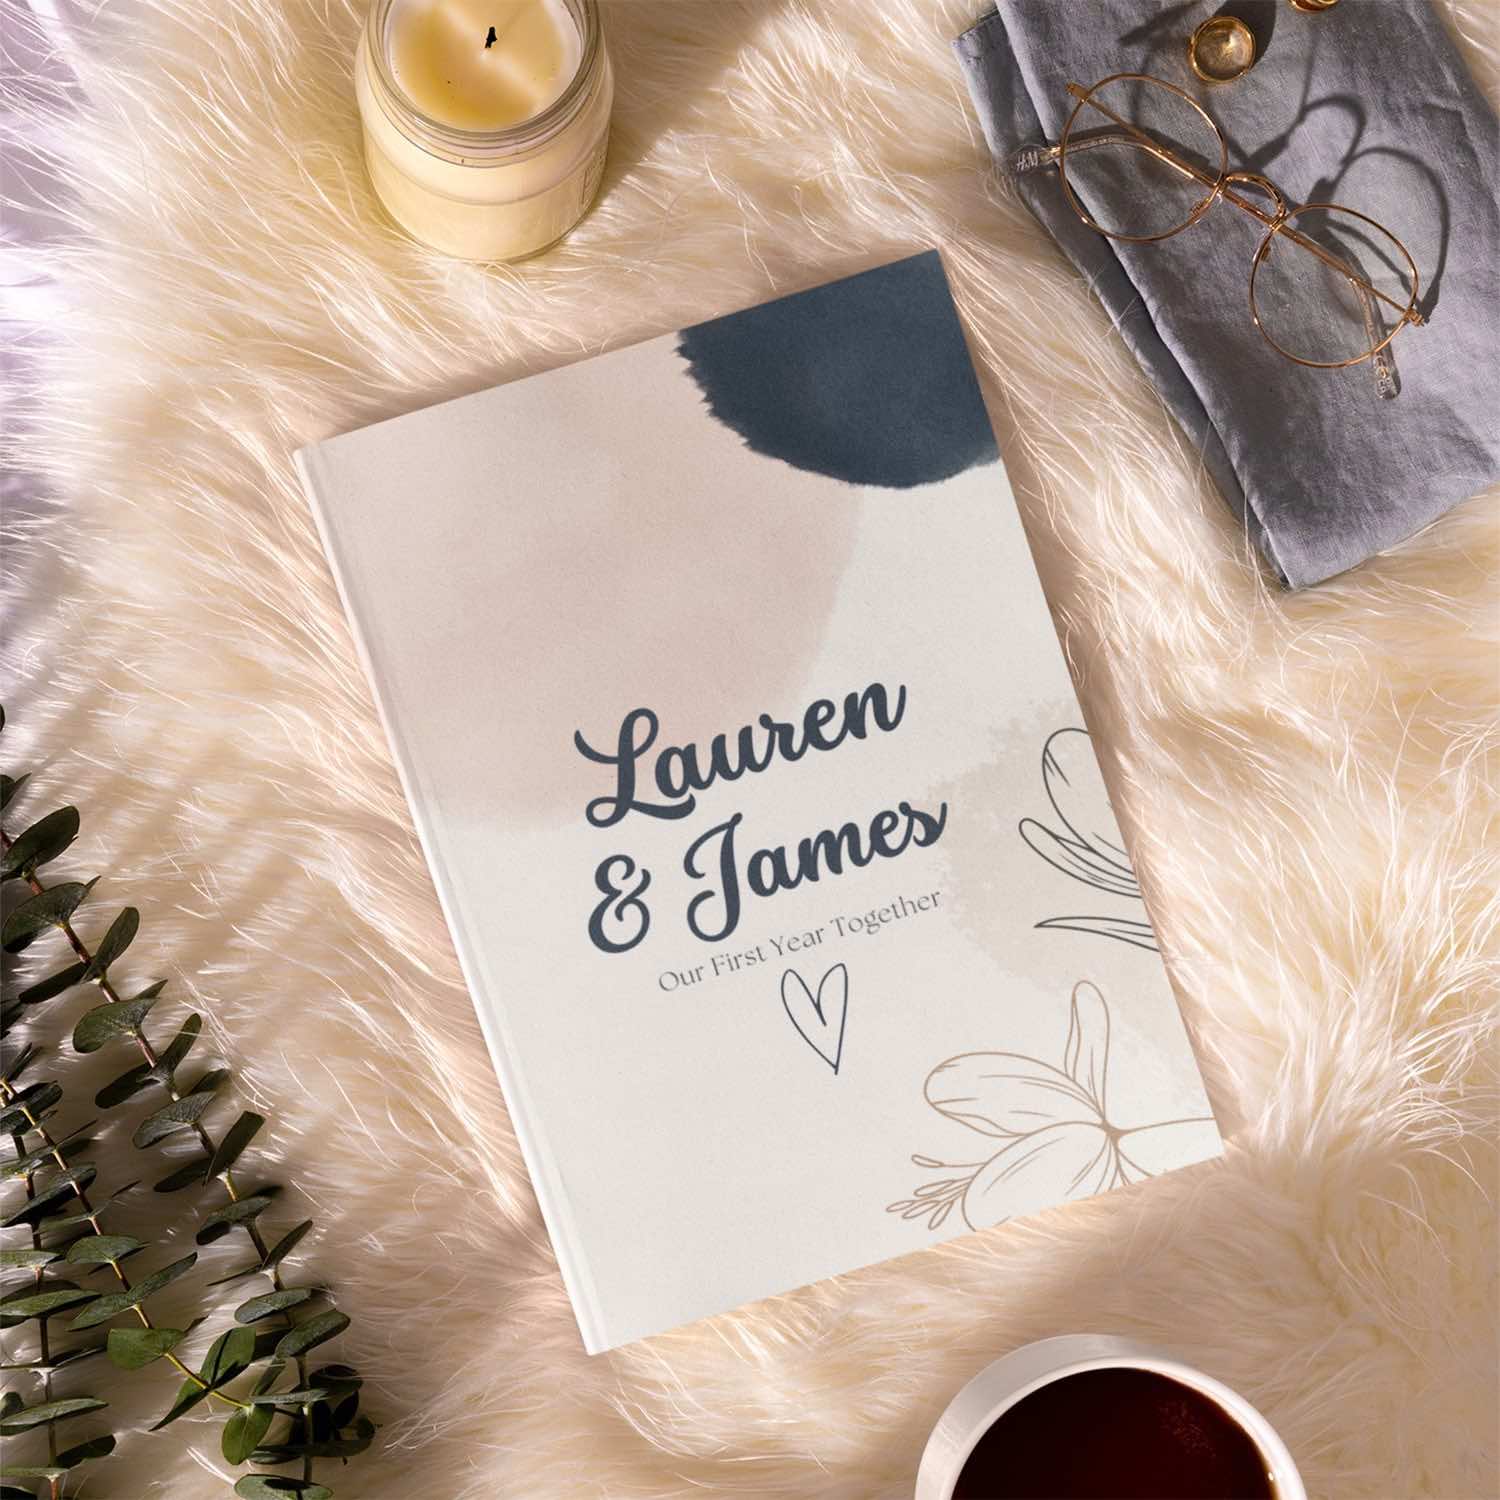 Reasons Why I Love You Book, Personalized Journal for Him, I Love You Gift,  Gift for Boyfriend Girlfriend, Valentines Day, Anniversary Gift -   Norway